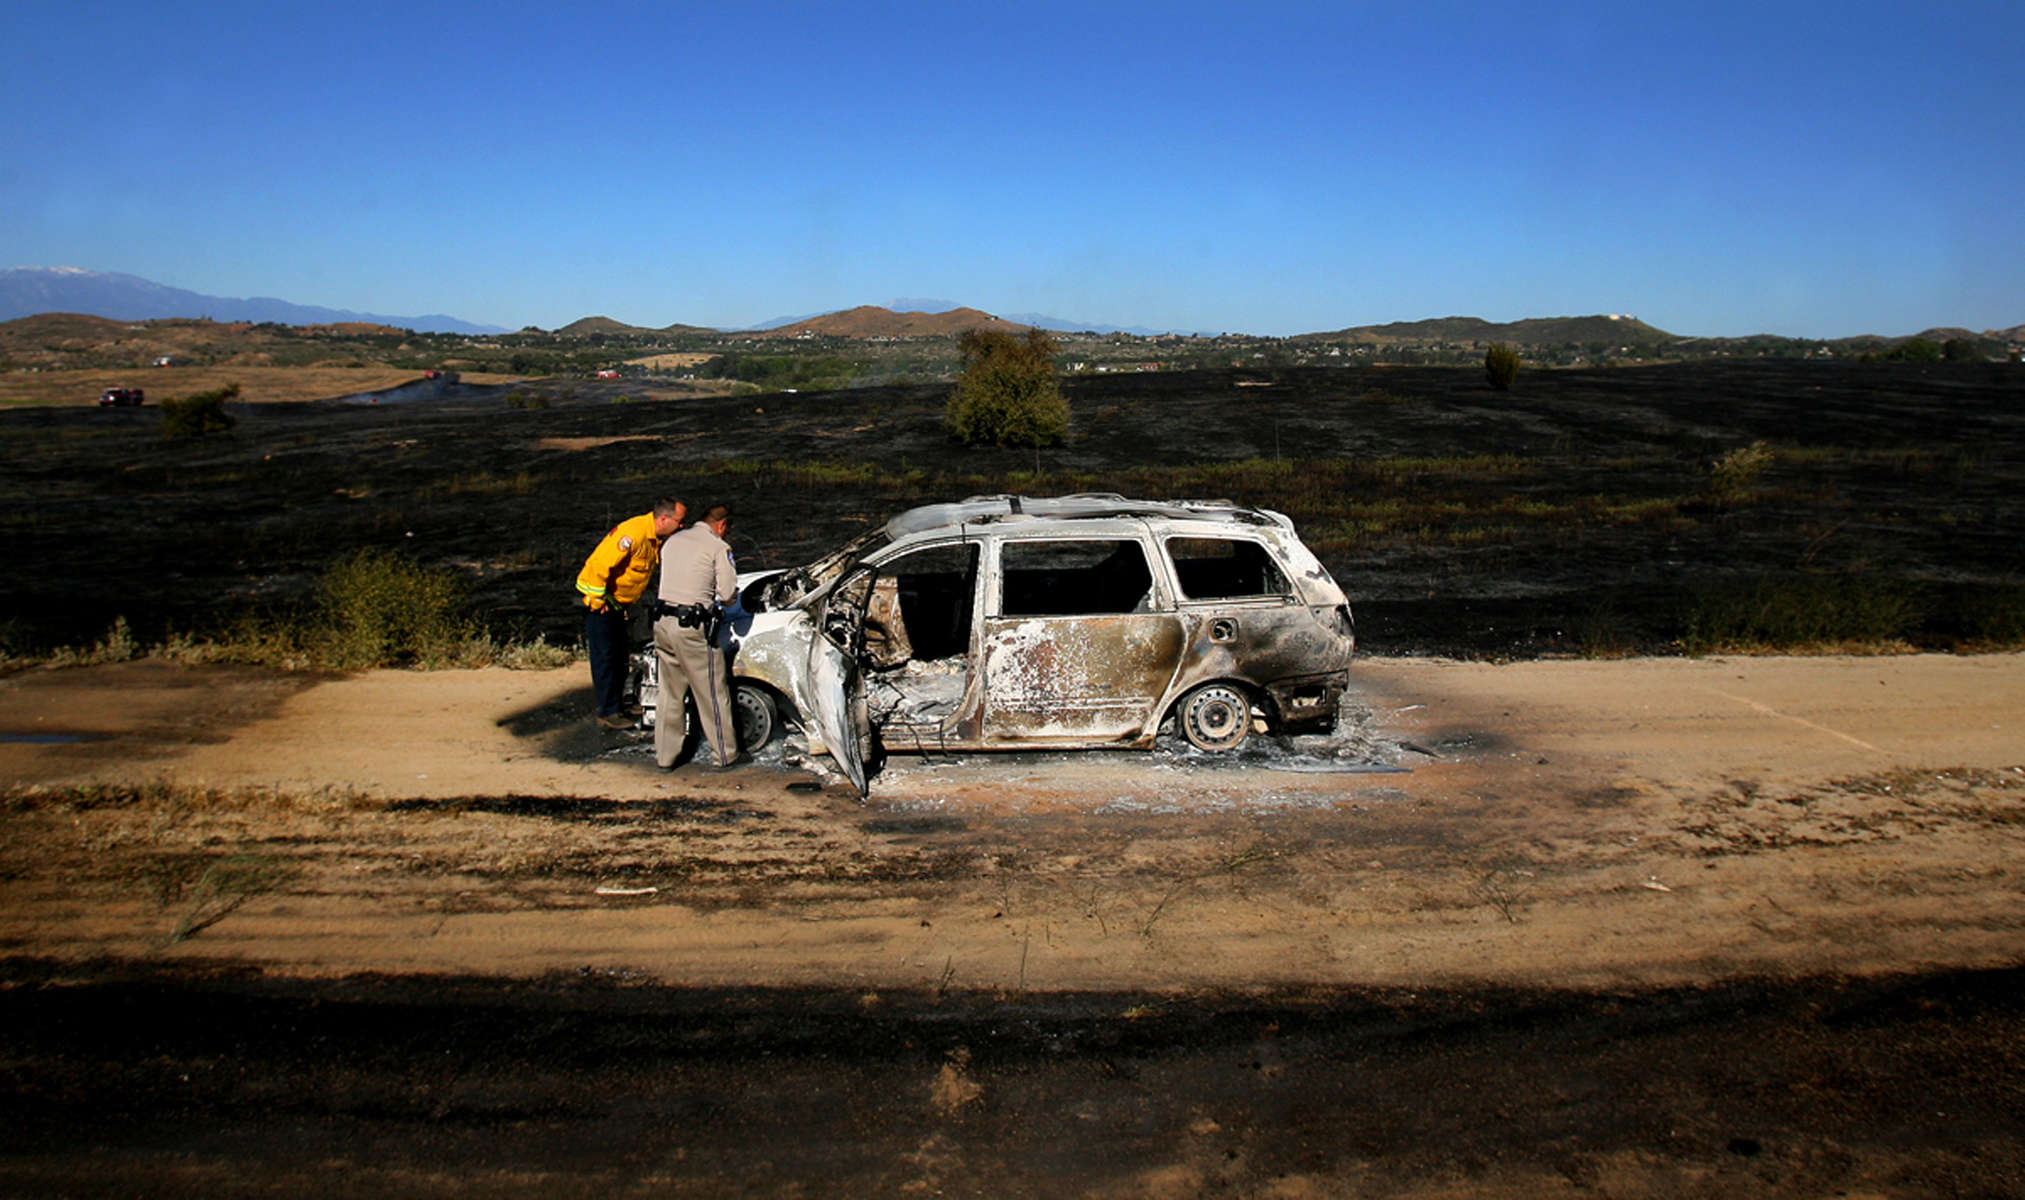 Lake Matthews station Battalion Chief Greg Everhart, left, and California Highway Patrol officer Tony Coronado examine a burnt vehicle on a dirt road near Gavilan Road in Riverside, Calif. According to Cal Fire, a motorist was driving the vehicle whenit caught fire and then burned 45 acres of brush.  (The Press-Enterprise/ Mark Zaleski)